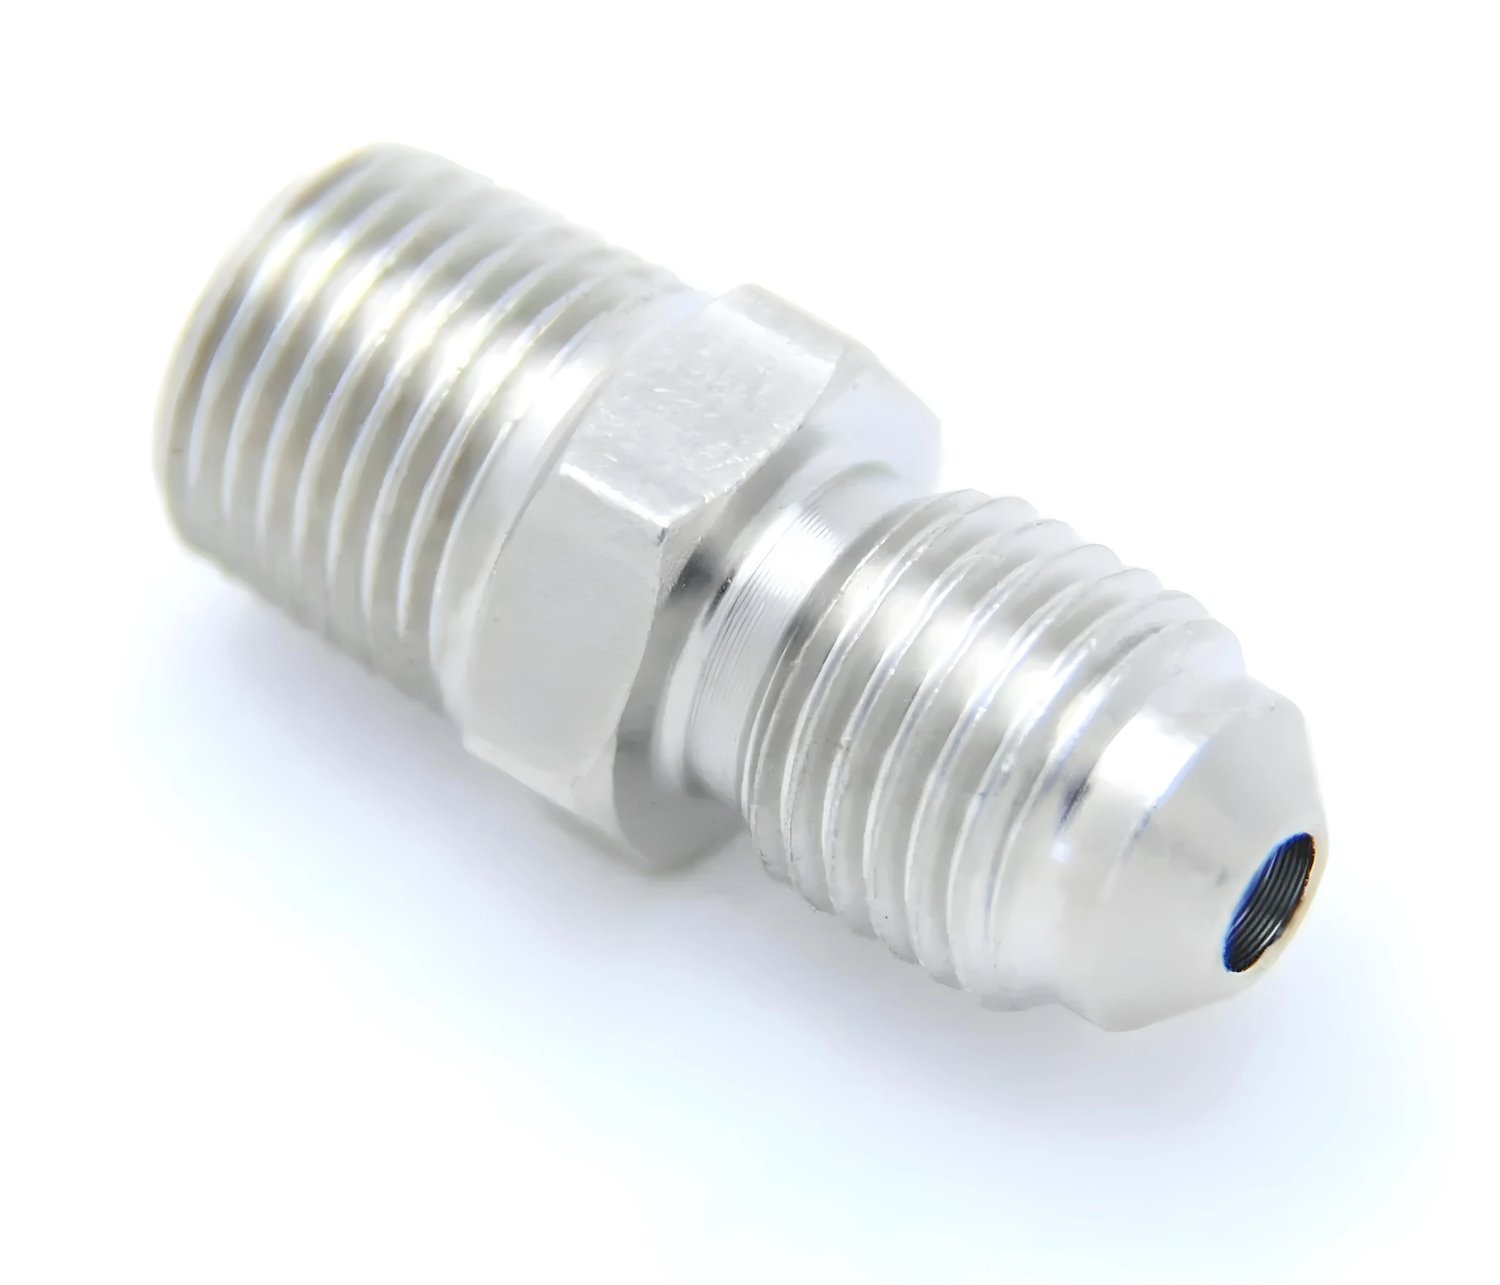 00-01151-B 1/8 in. NPT x 3AN Straight Fitting, Male/Male